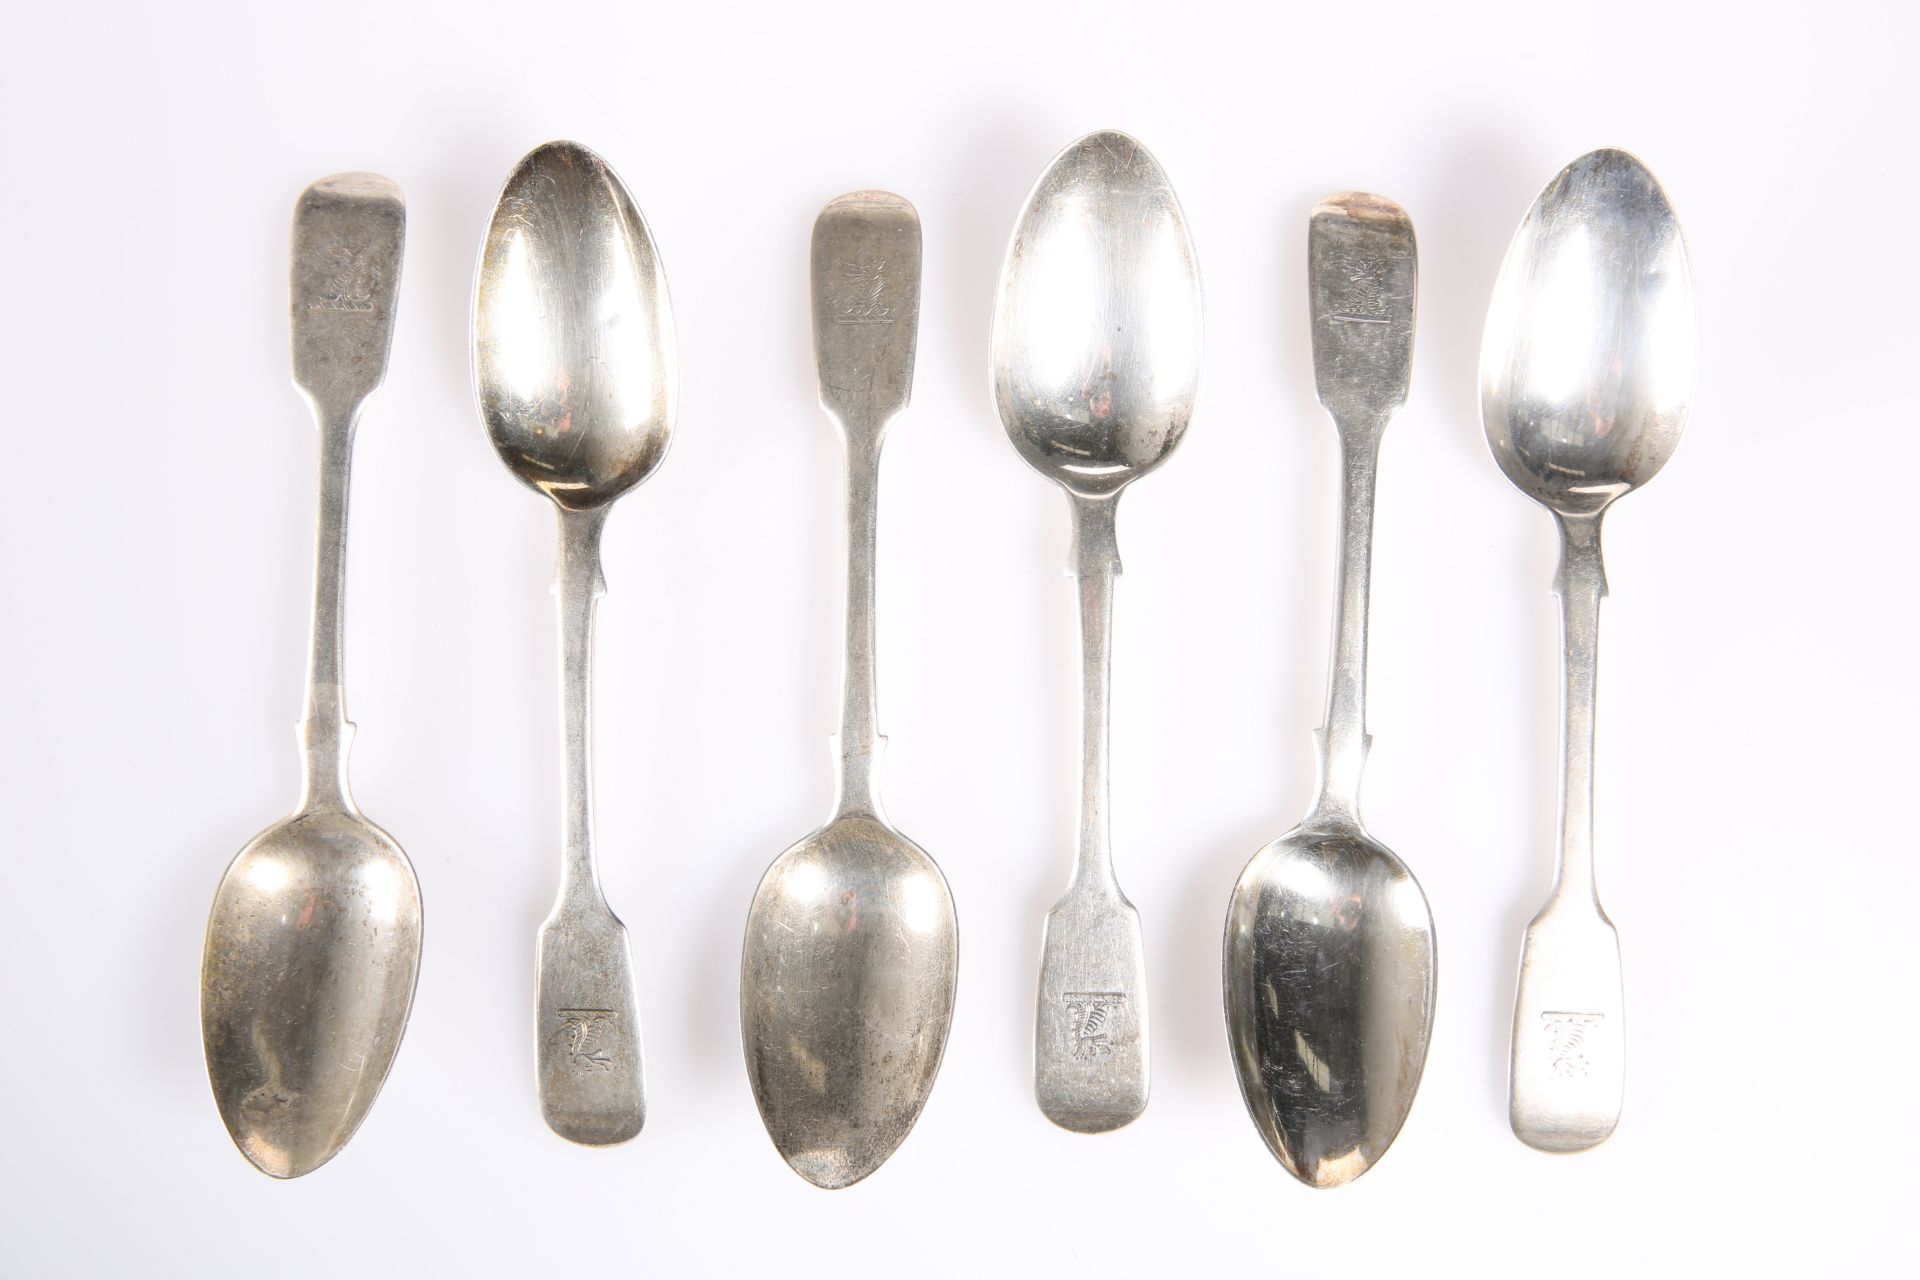 ~ A SET OF SIX VICTORIAN SILVER DESSERT SPOONS, by John James Whiting, London 1847, Fiddle